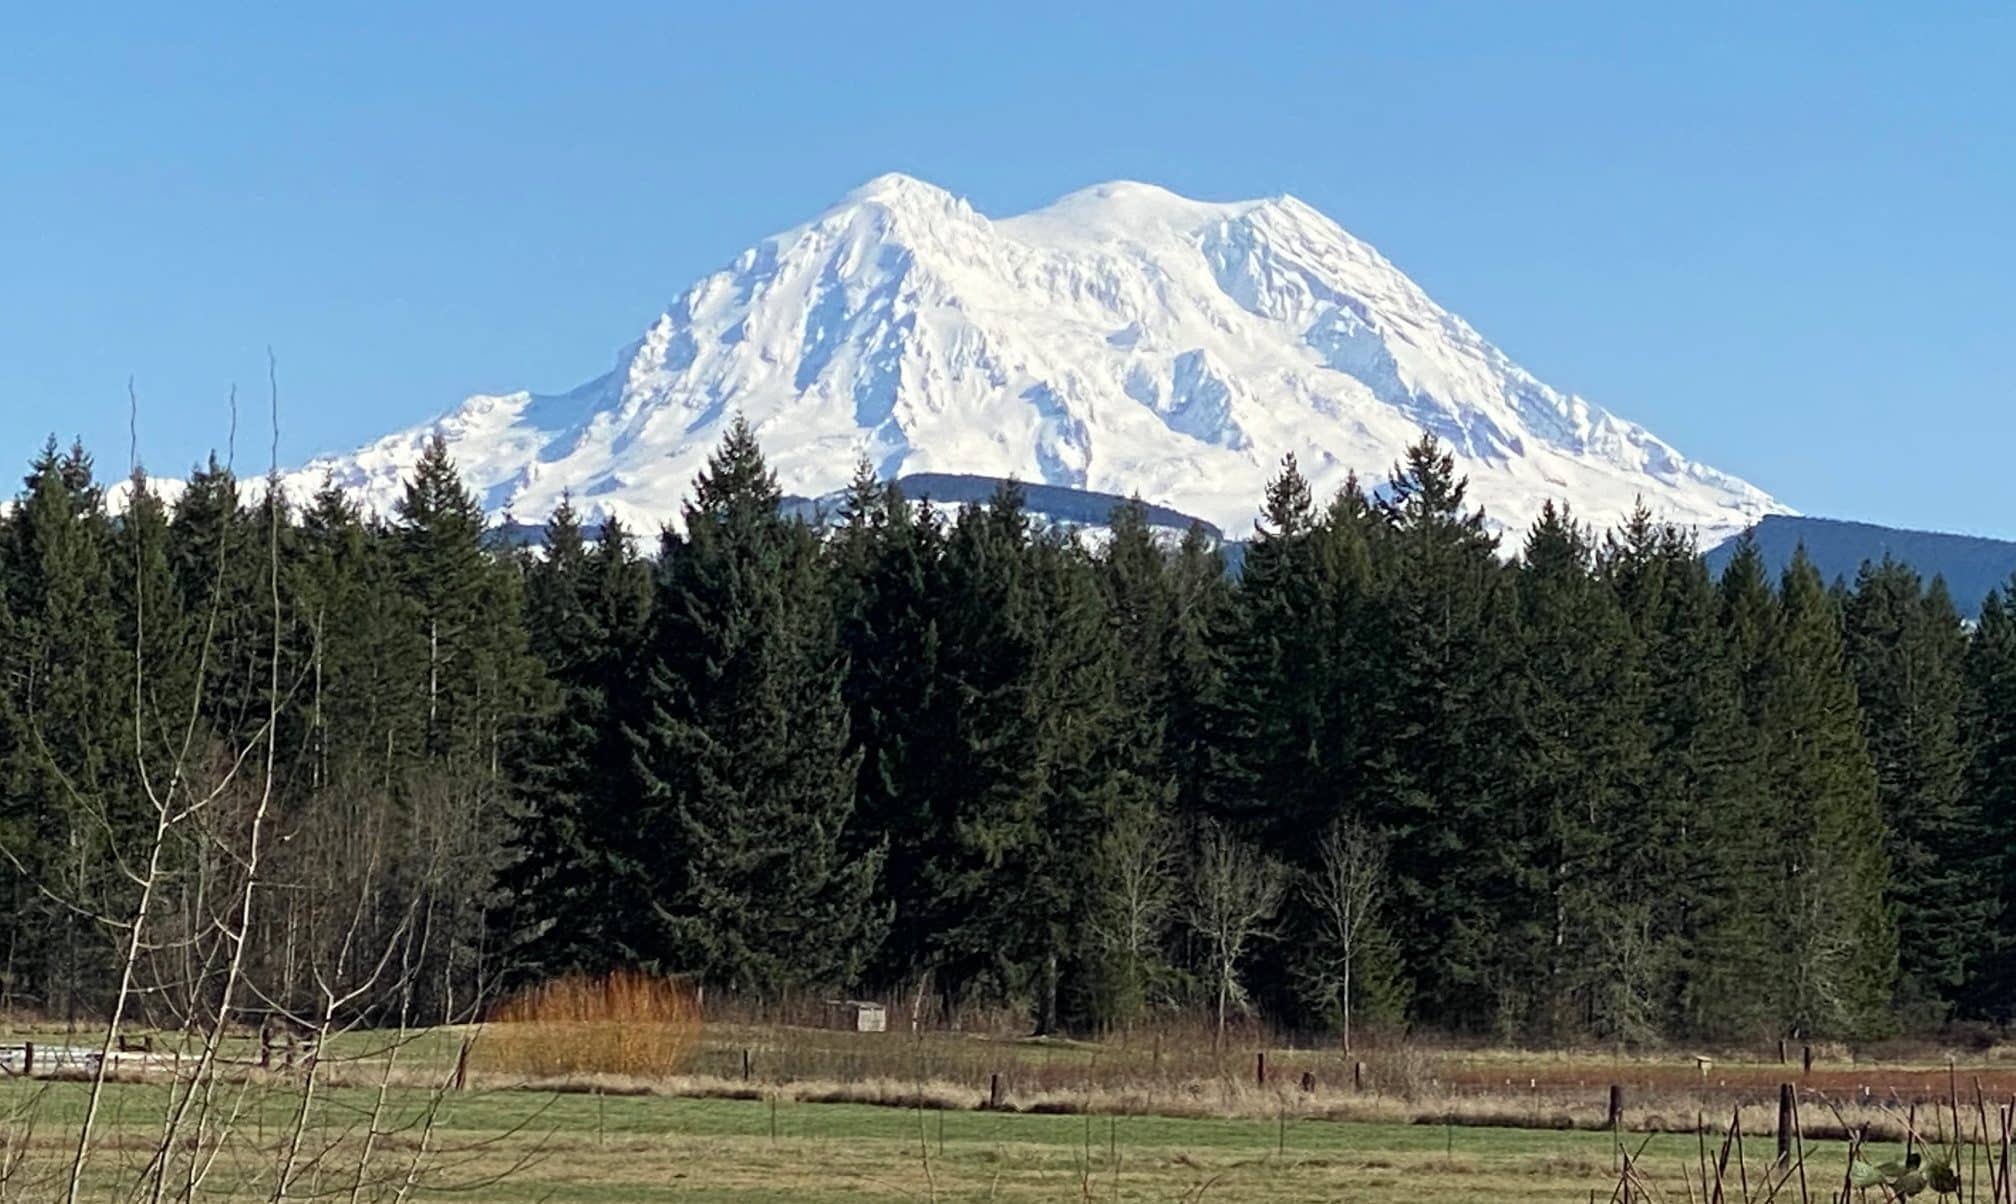 View of Mount Rainier from Dogwood Park